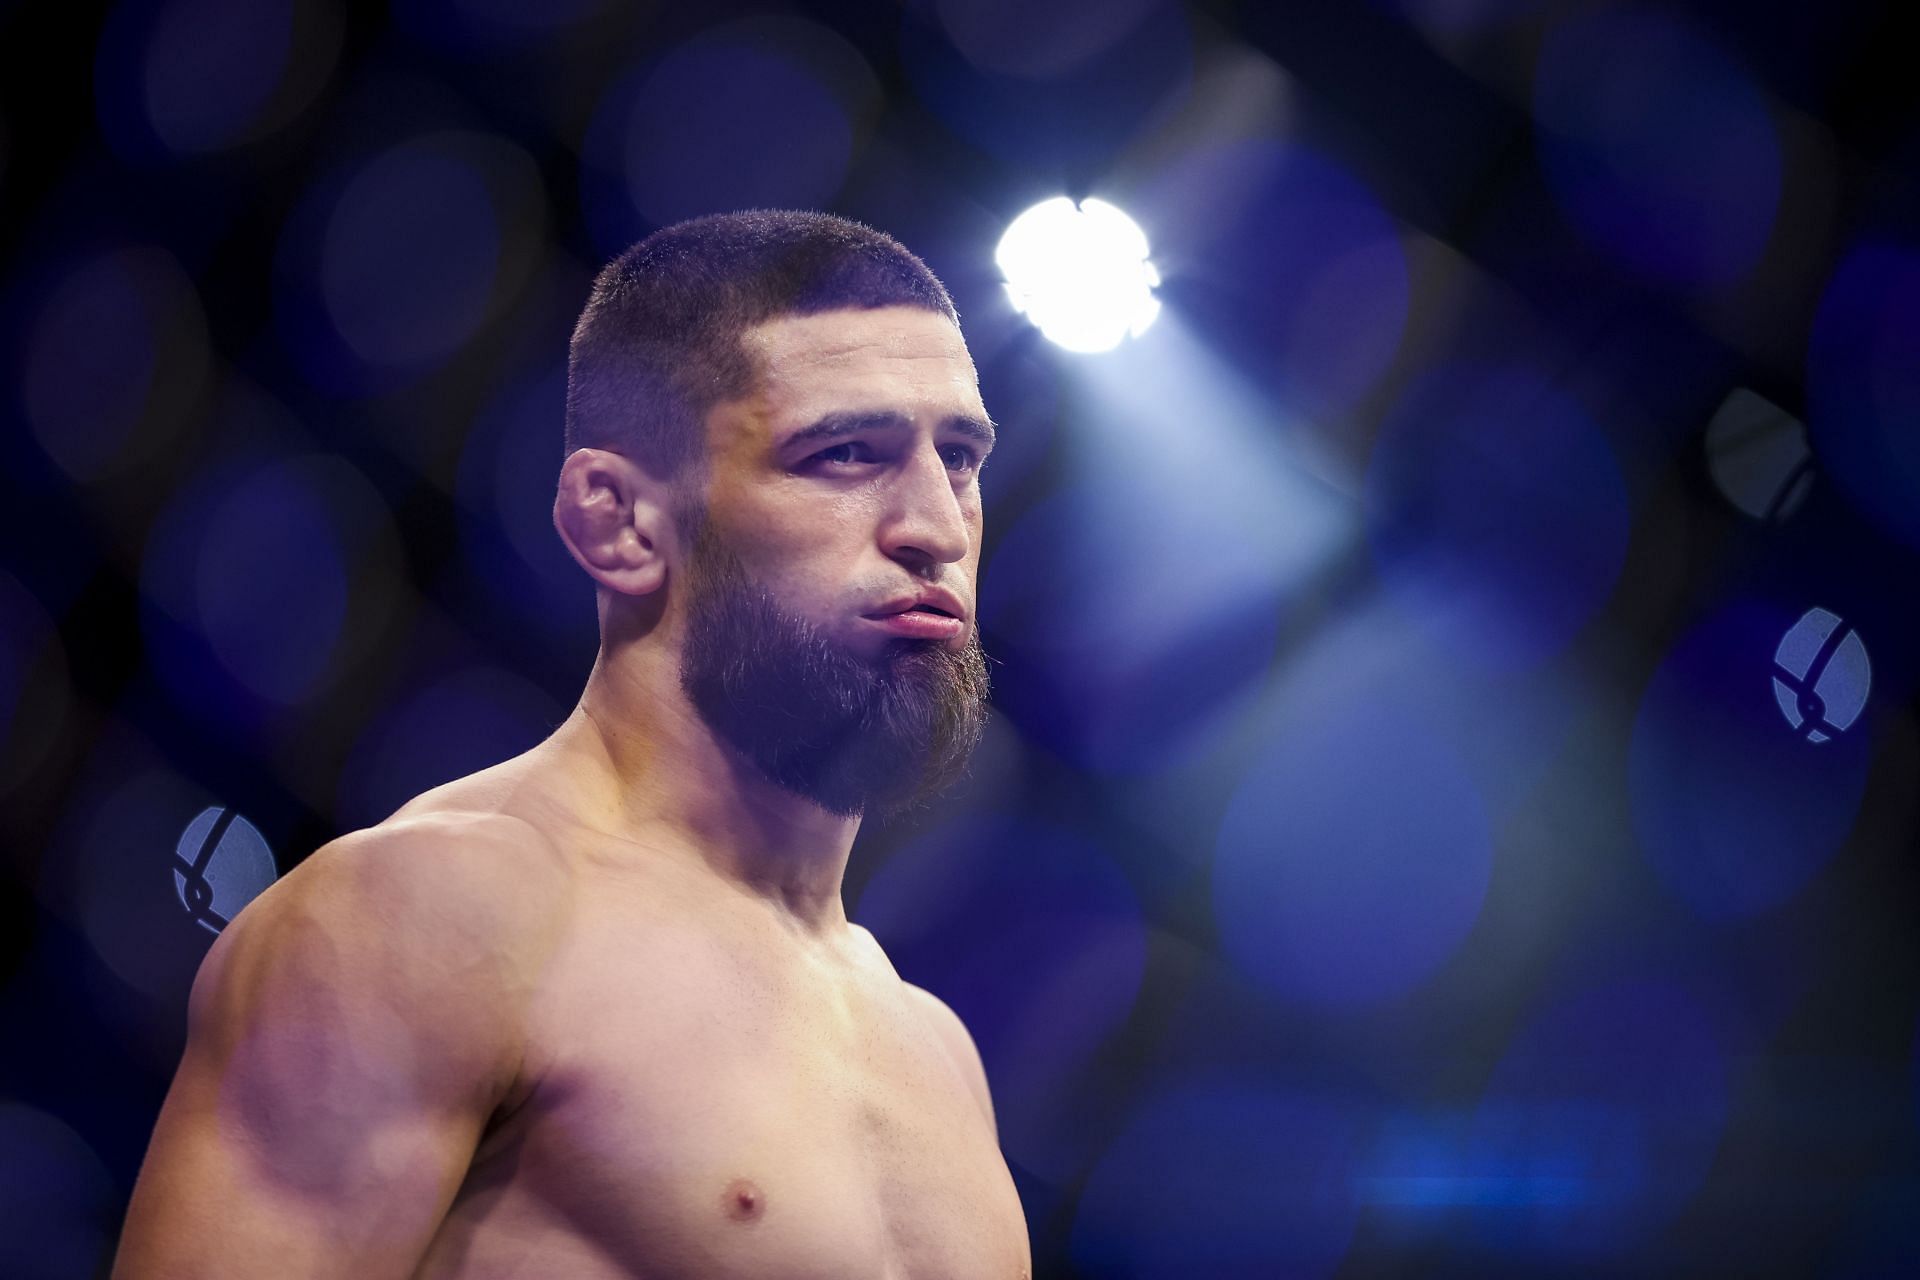 Khamzat Chimaev should be waiting in the wings for a welterweight title shot in 2023